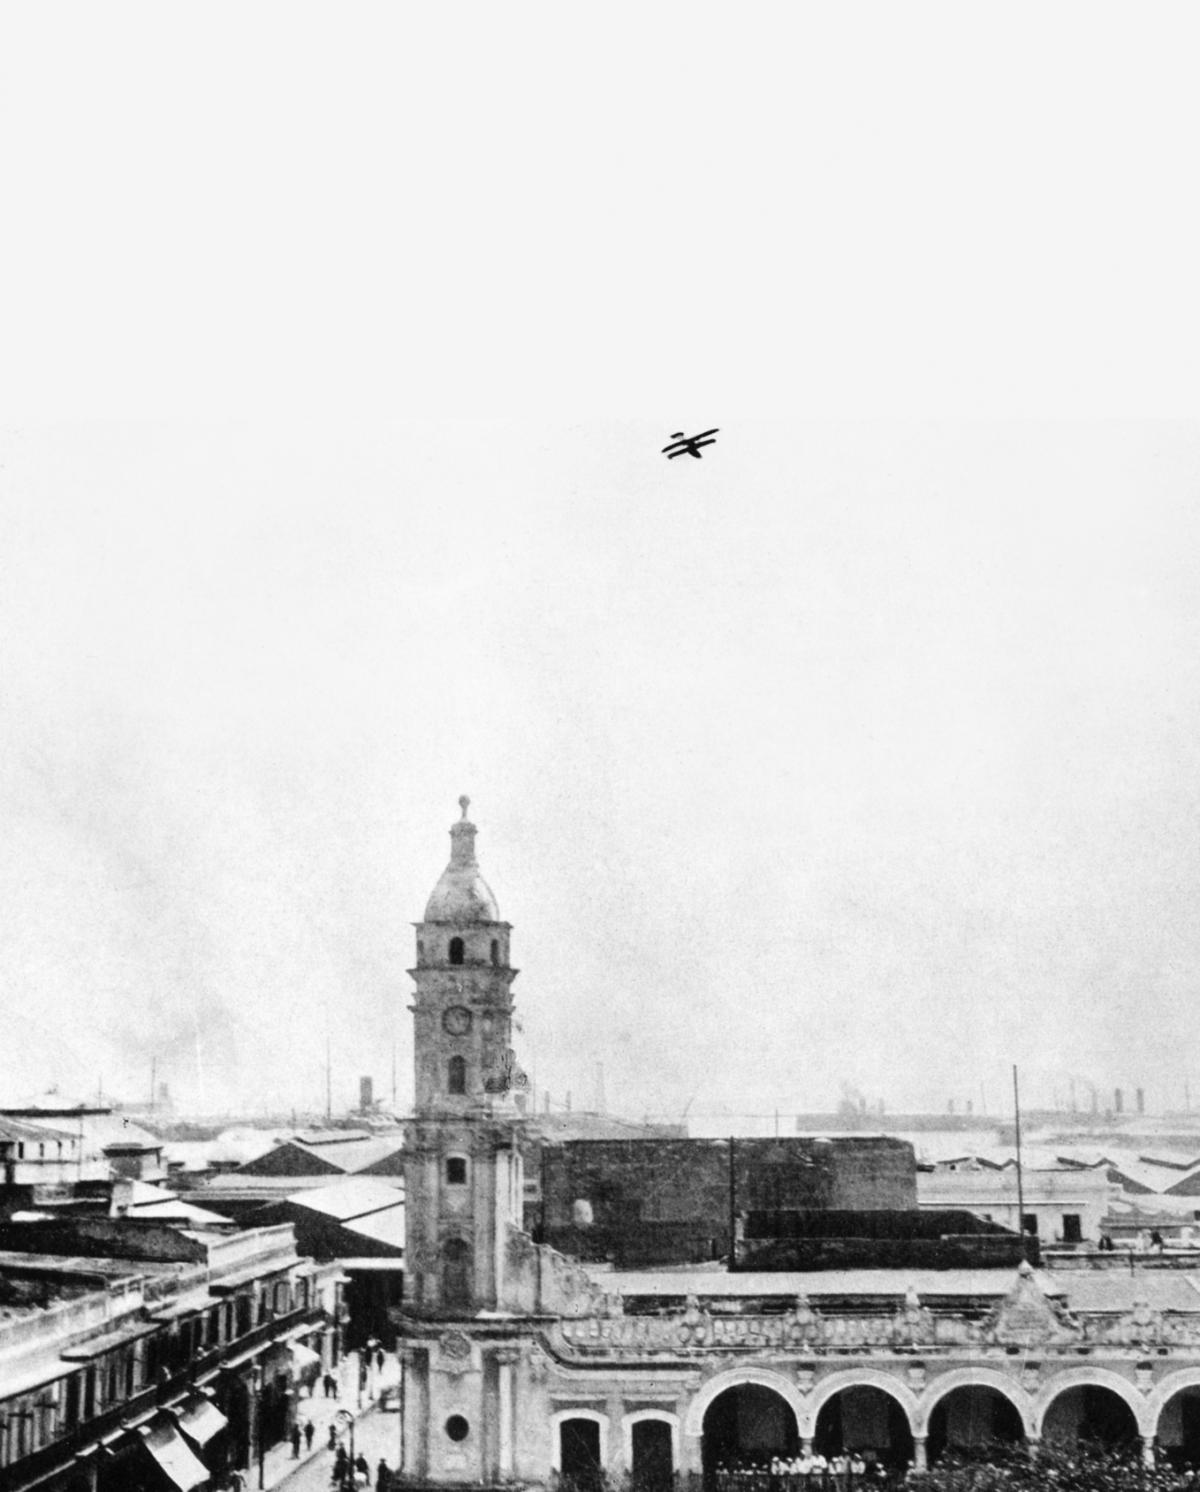 The Curtiss flying boat AB-3 soars over Vera Cruz as its pilot and observer search for enemy snipers on city rooftops during the U.S. intervention in the Mexican Revolution. 